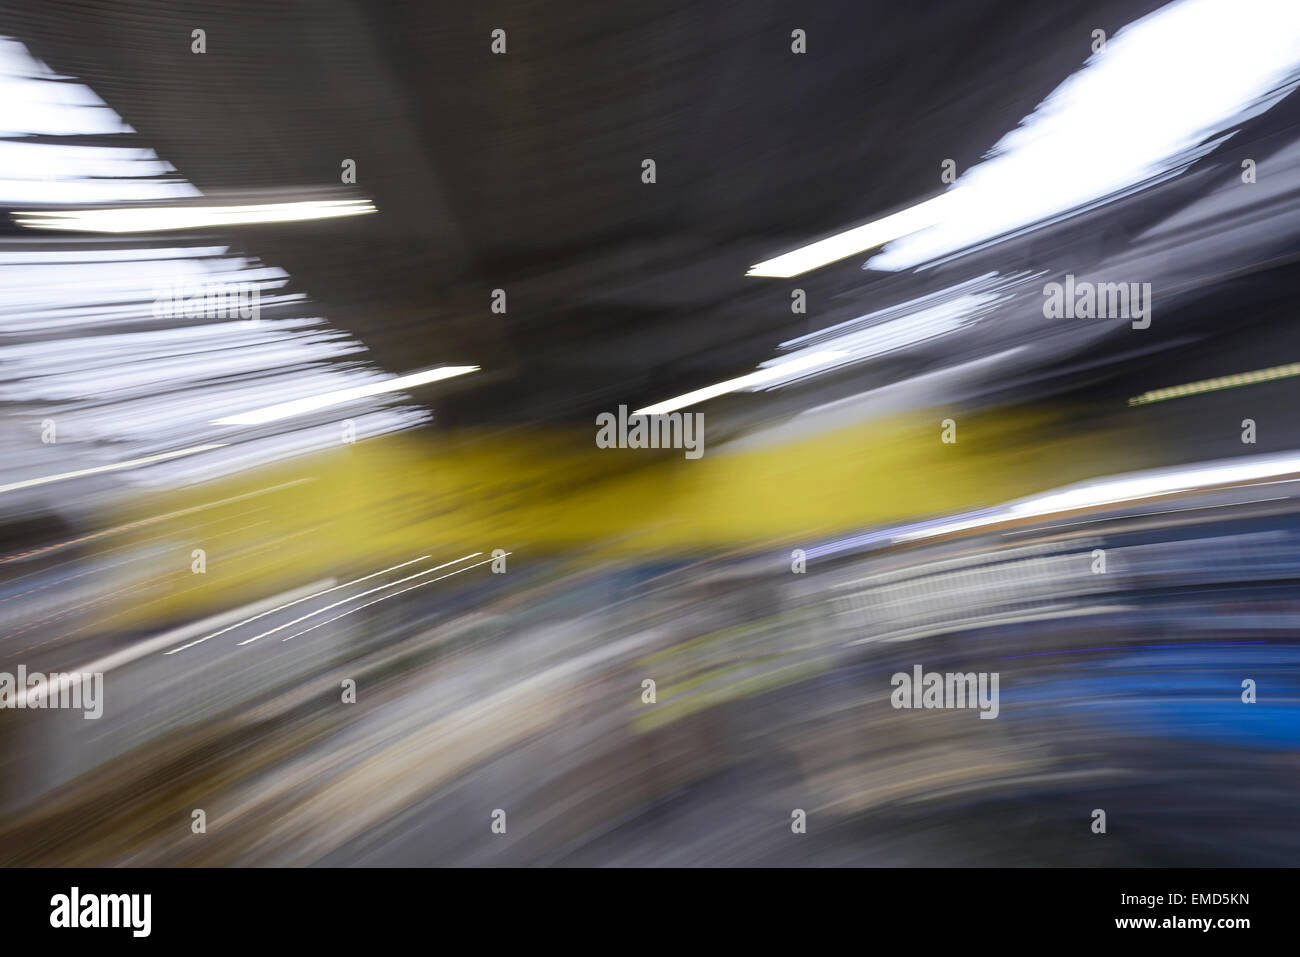 Abstract camera motion blur and movement Stock Photo